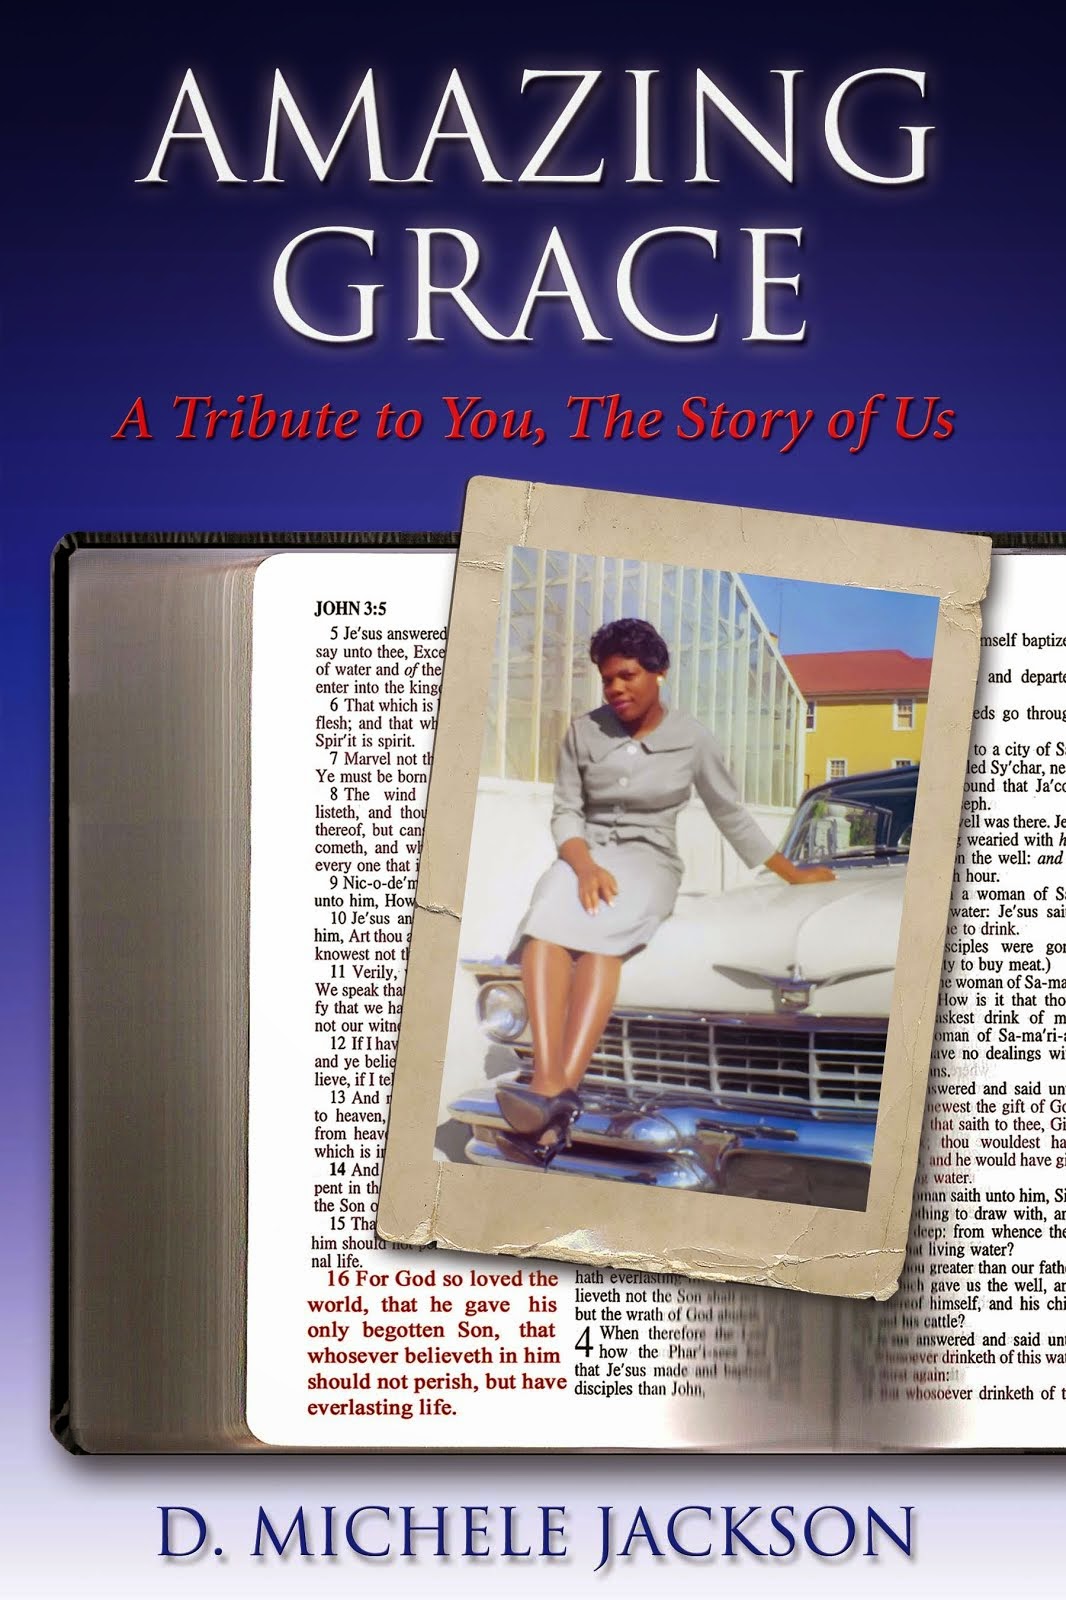 Amazing Grace: A Tribute to You, The Story of Us